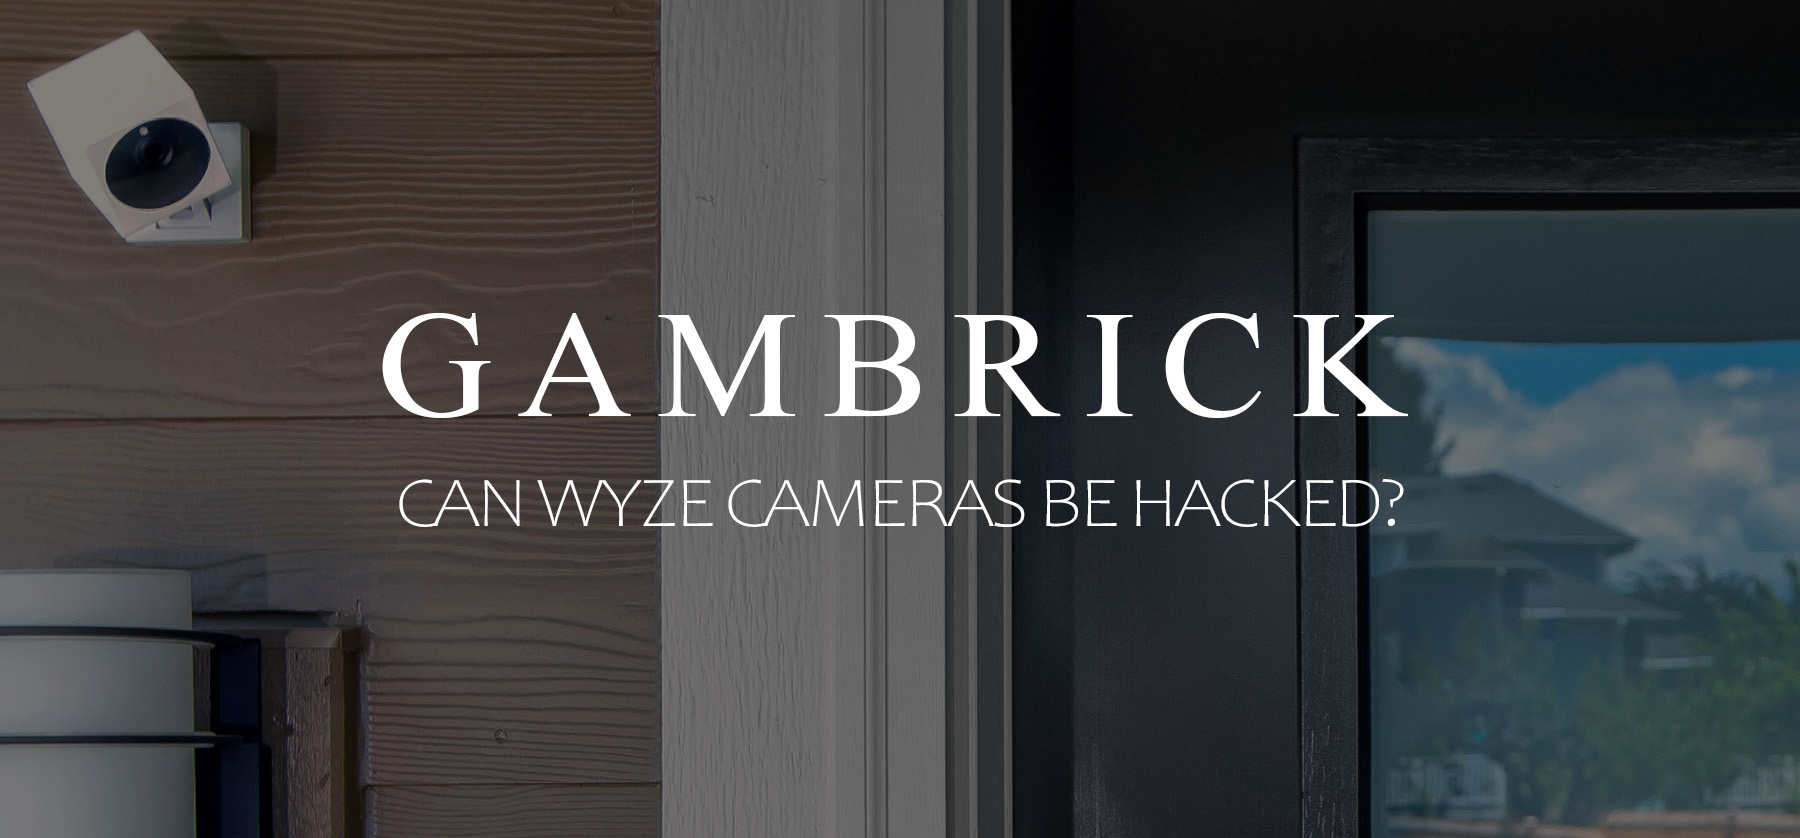 Can Wyze Cameras Be Hacked banner 1.0